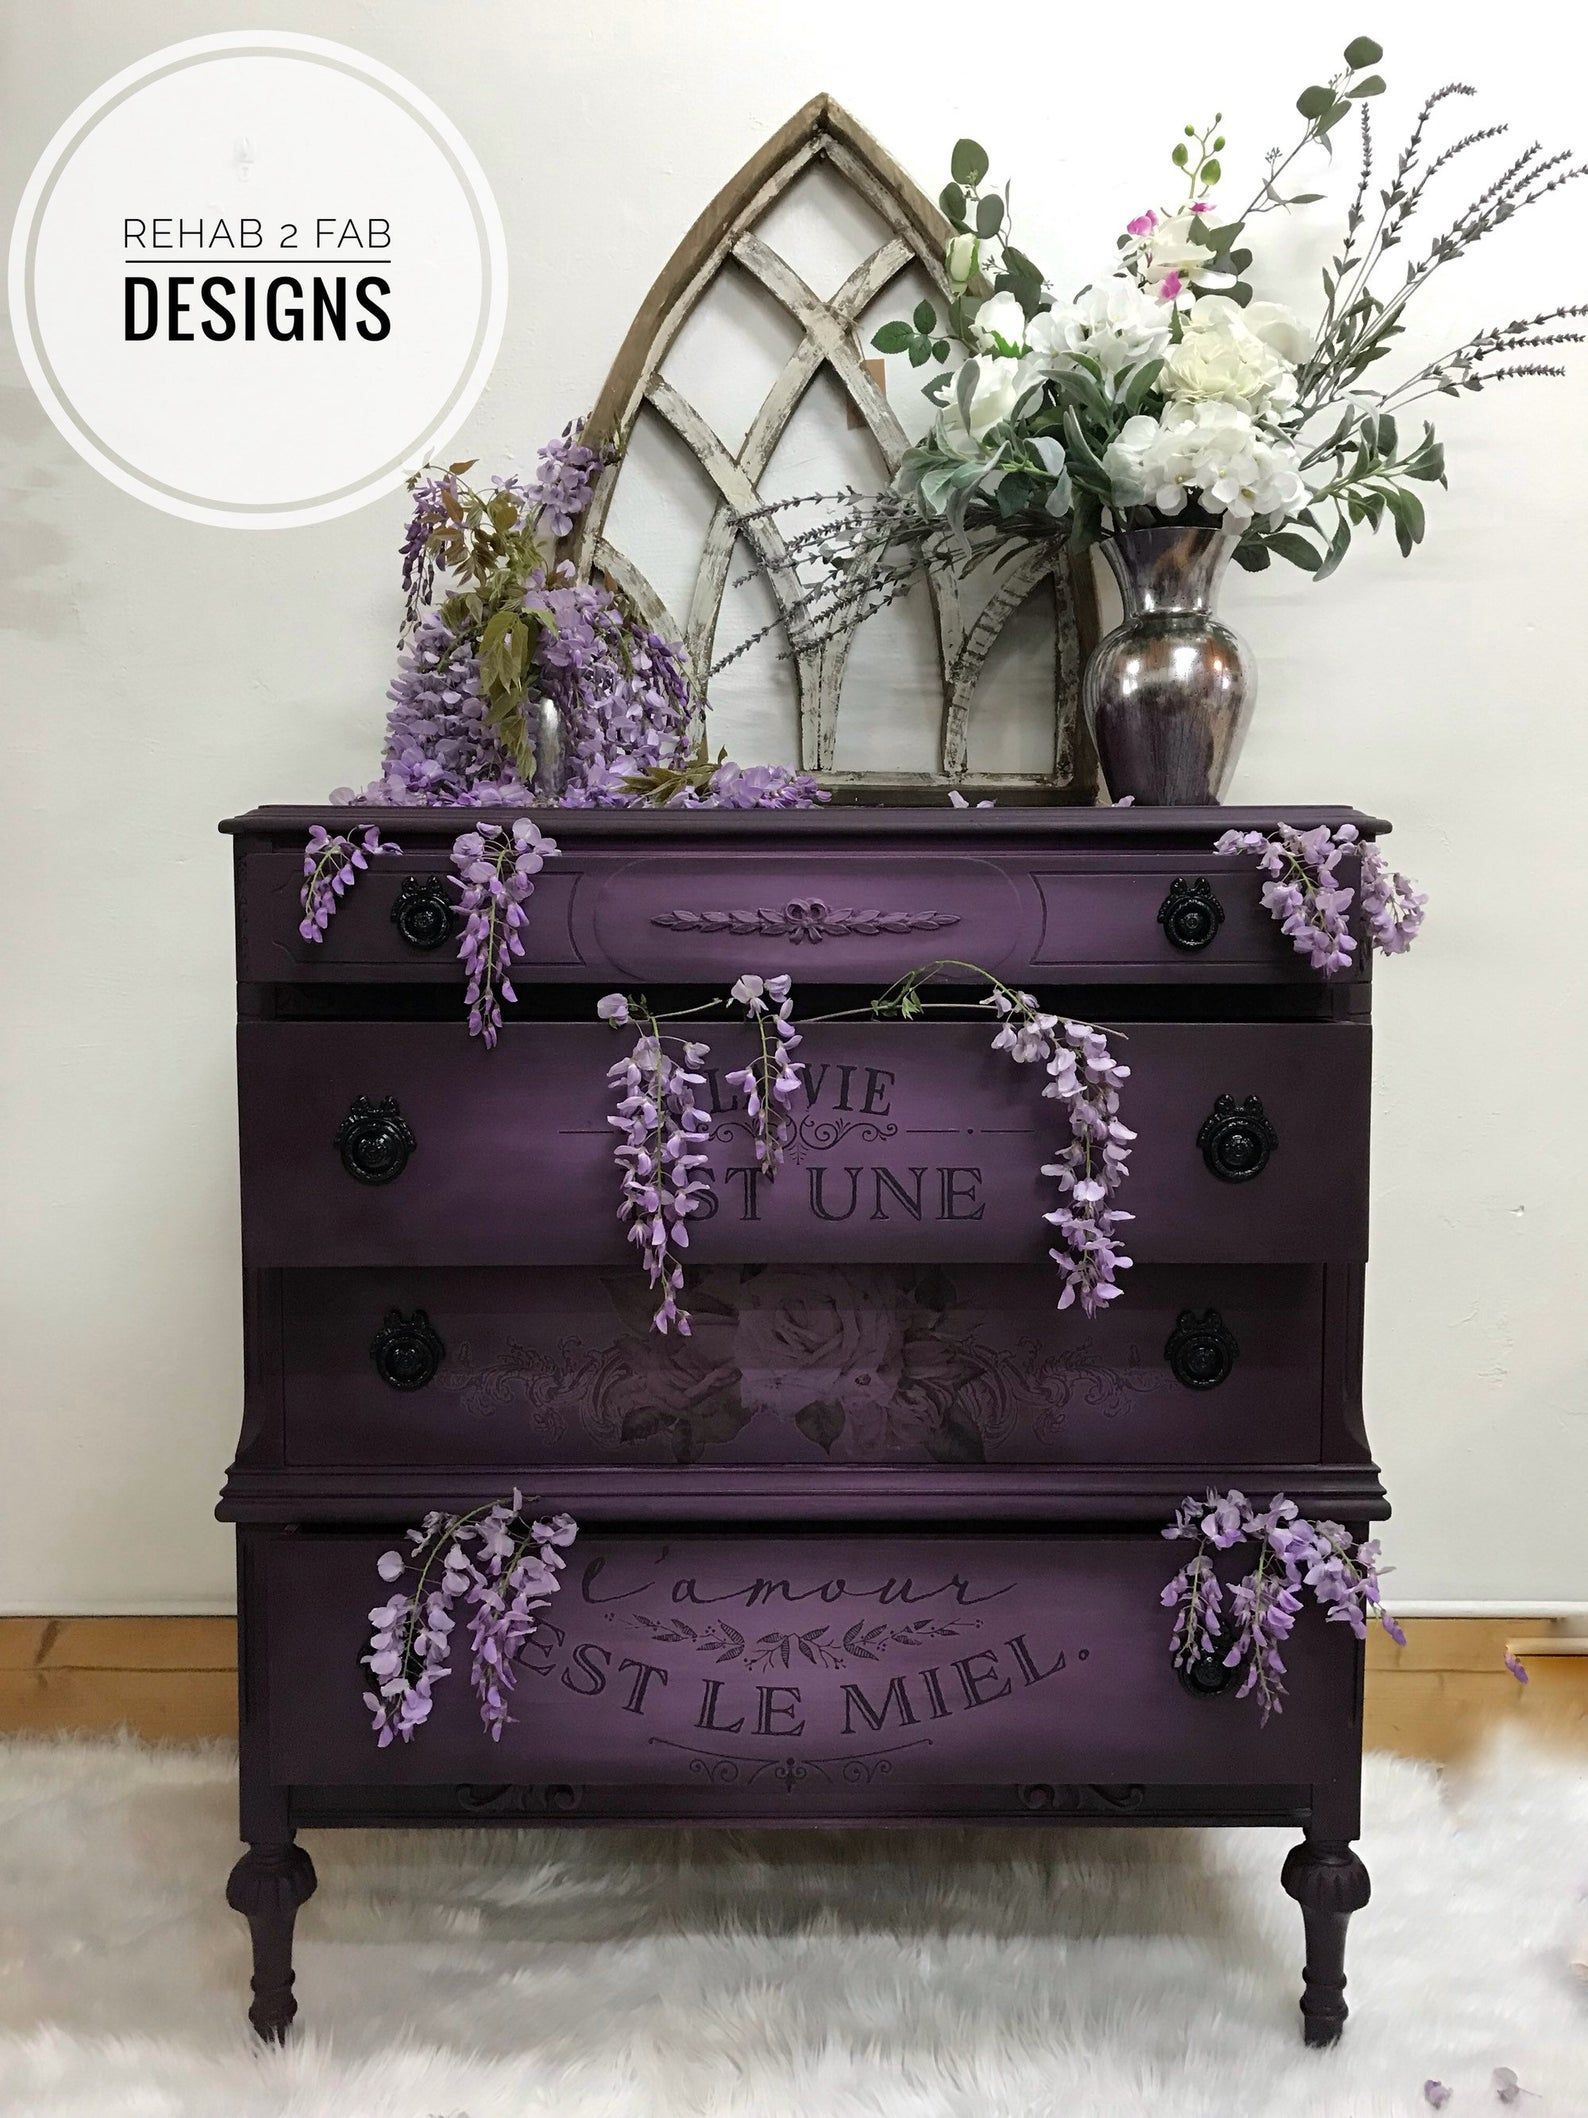 Furniture Painting Video Tutorial For The Black Cherry Antique Dresser - Furniture Painting Video Tutorial For The Black Cherry Antique Dresser -   17 diy Furniture dresser ideas